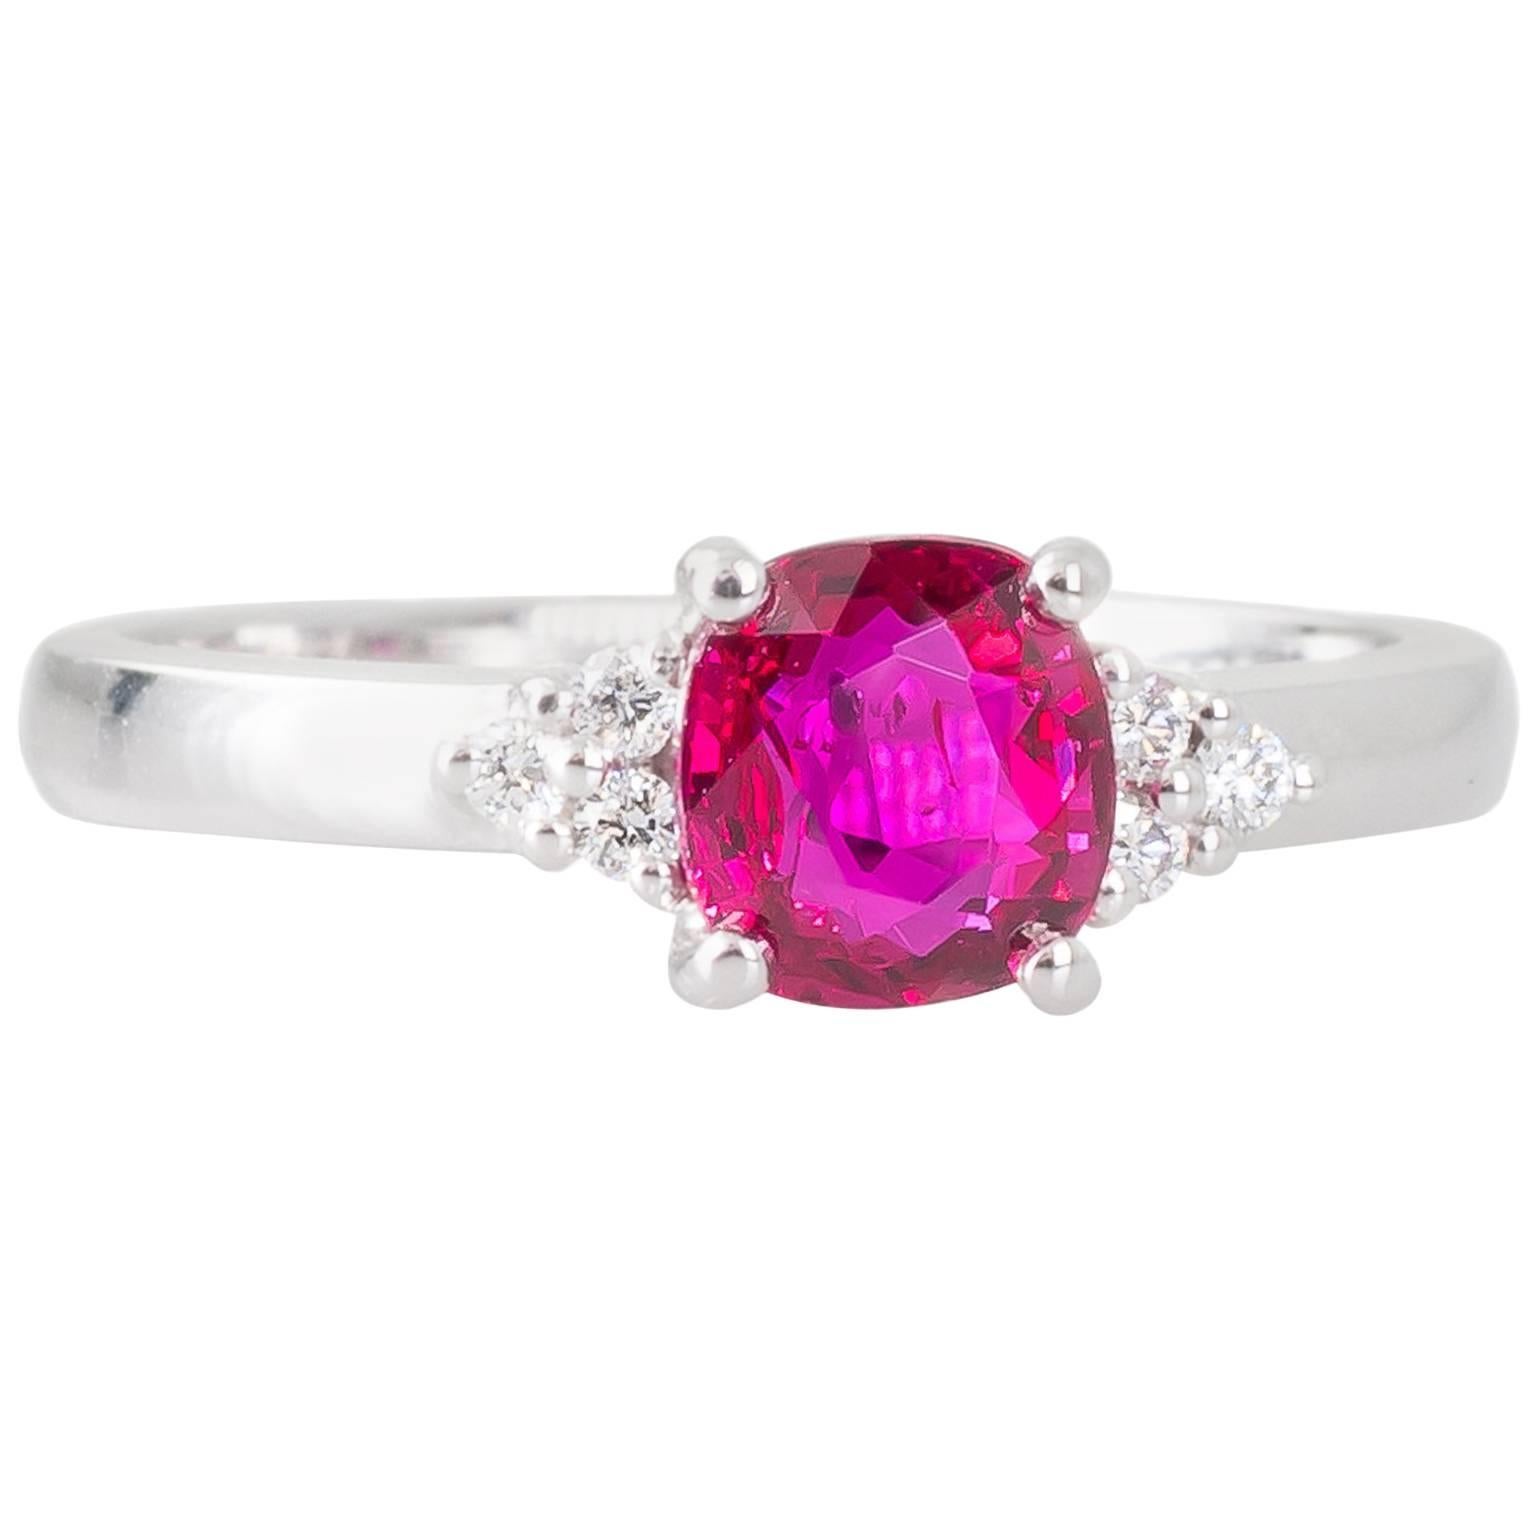 GIA Certified Unheated Mozambique 1.01 Carat Ruby and Diamond Ring